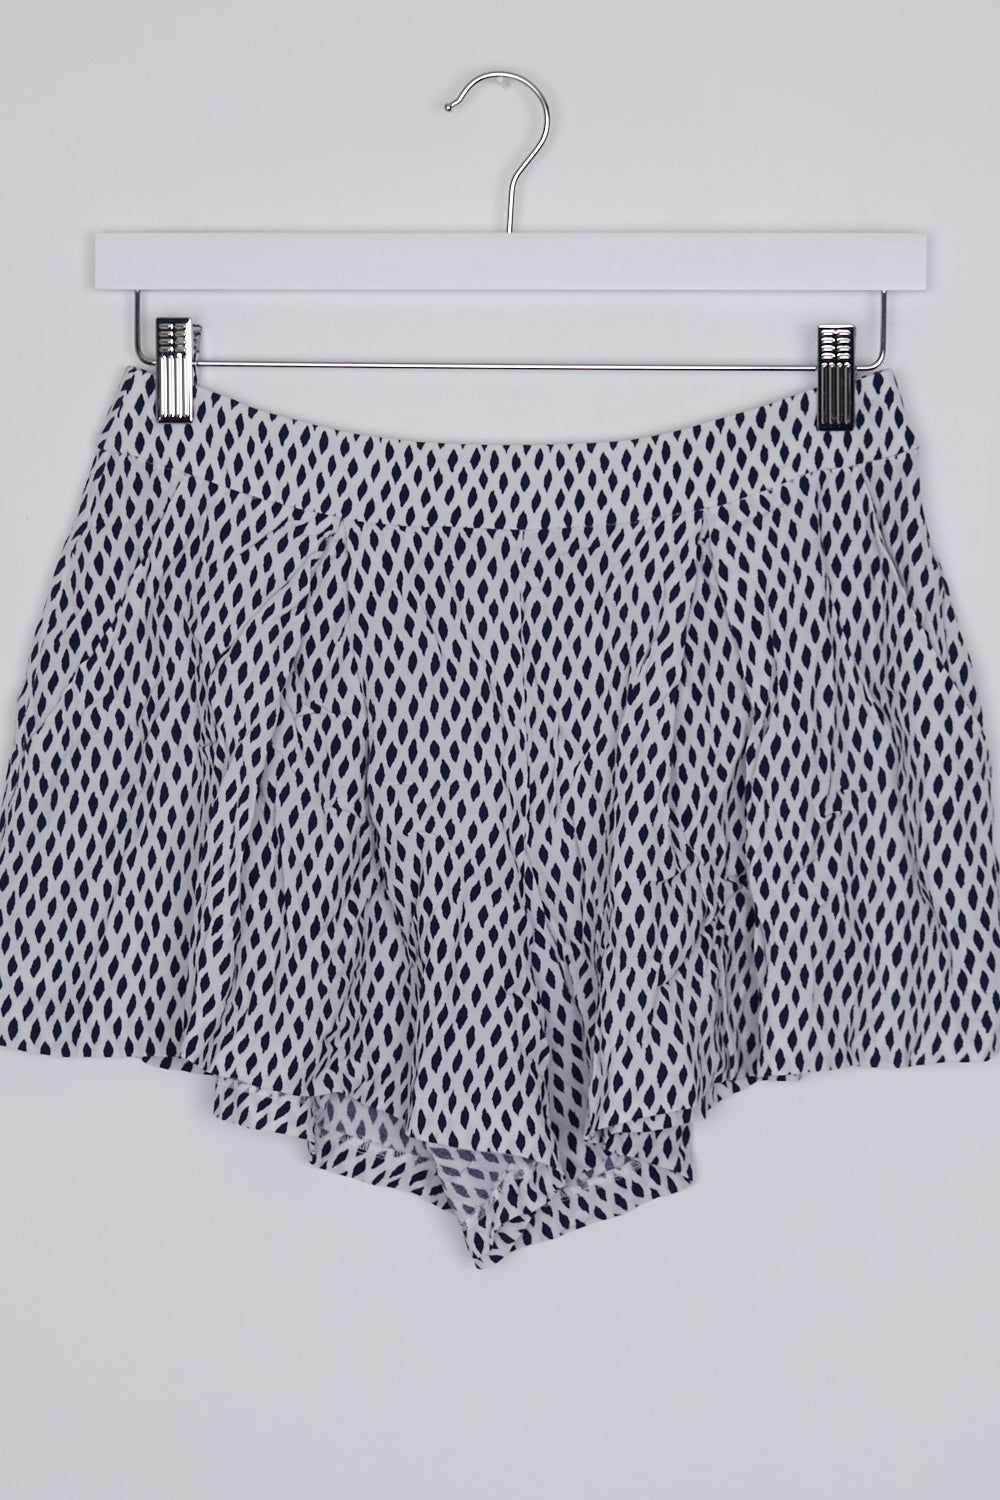 Sass & Bide White And Navy Patterned Pleated Shorts 8